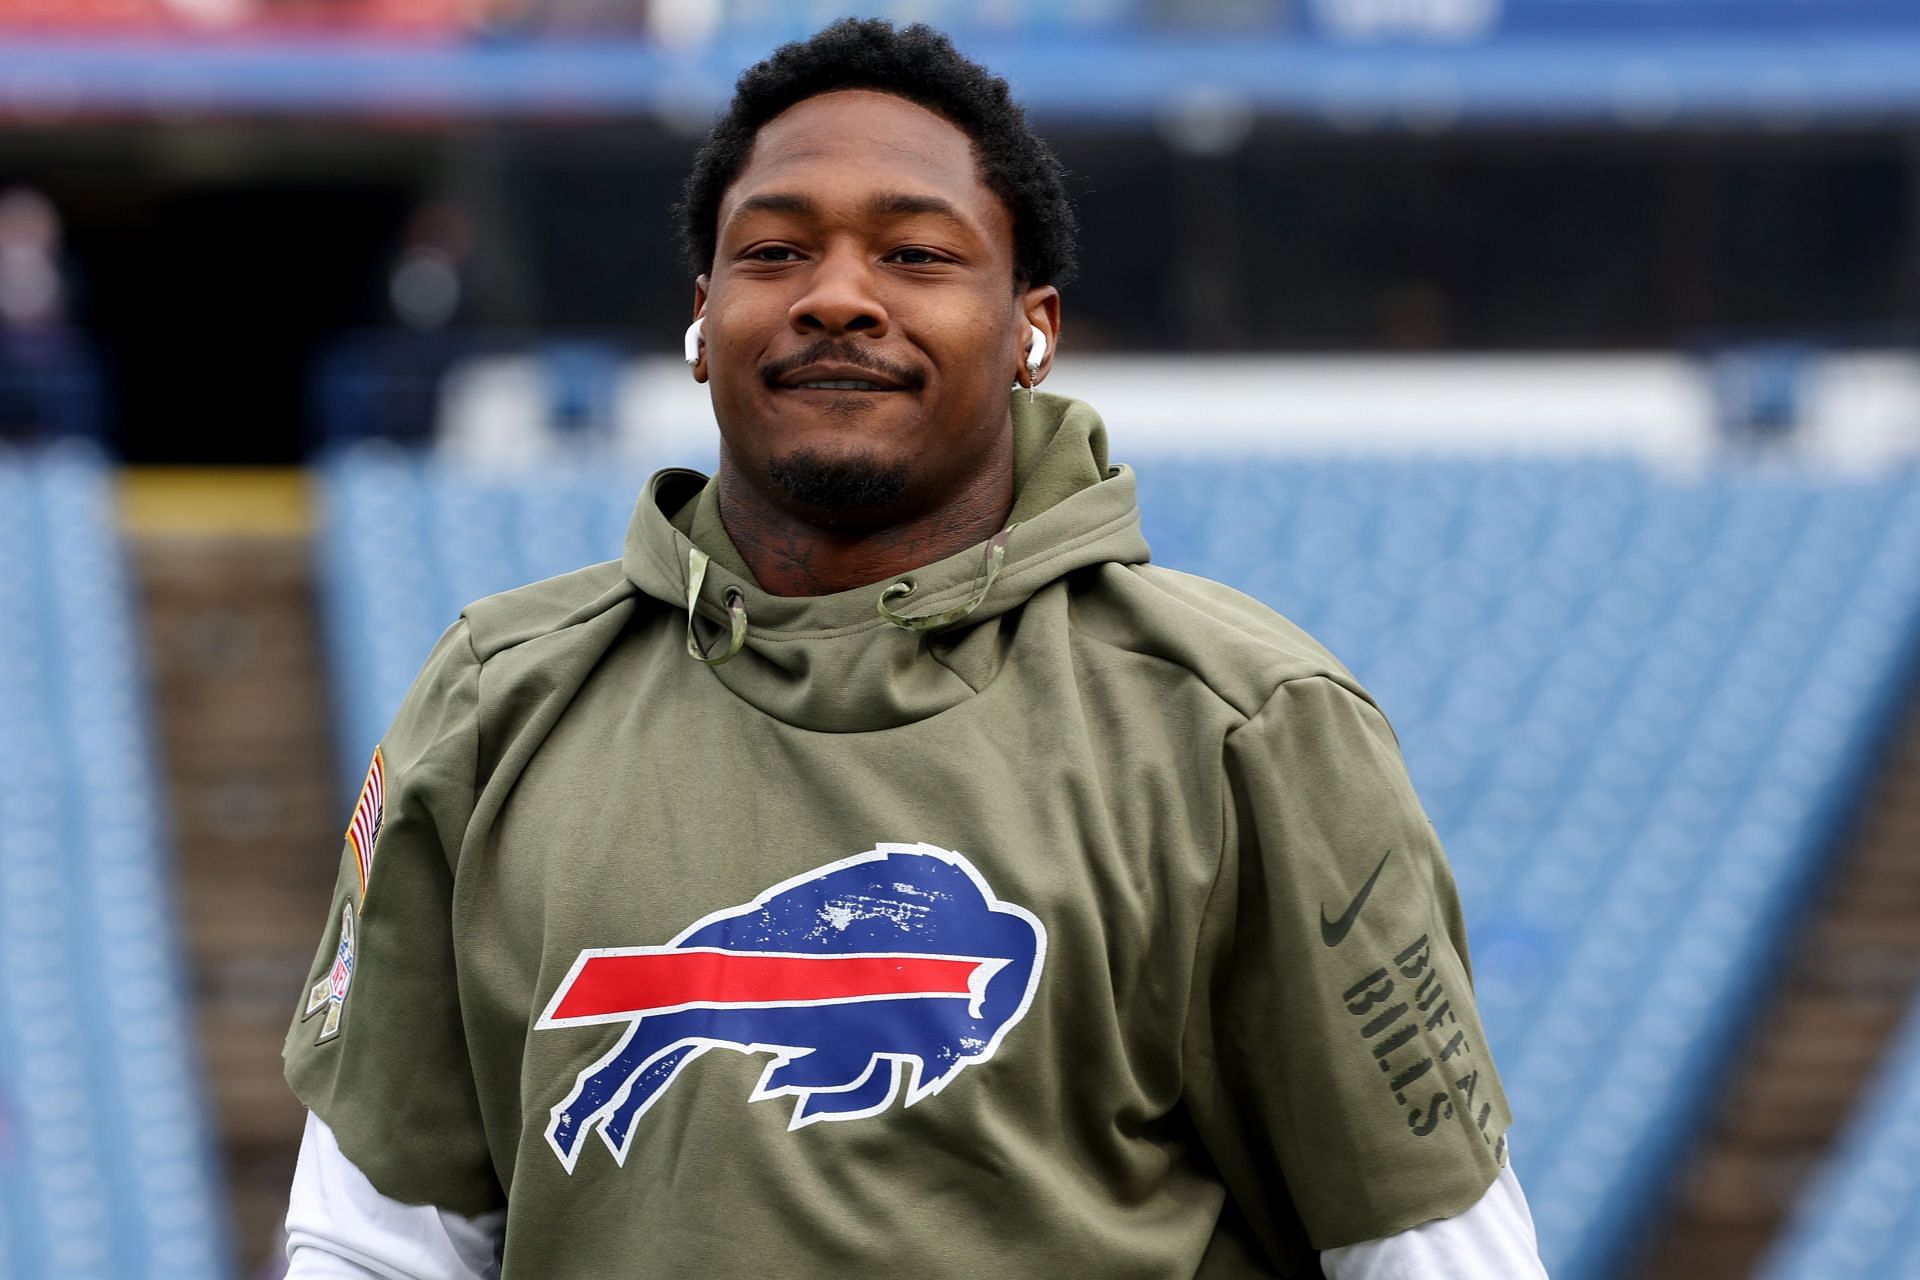 IN PHOTOS: Bills star Stefon Diggs dazzles on Met Gala debut, impresses NFL  fans with swanky Tommy Hilfiger suit